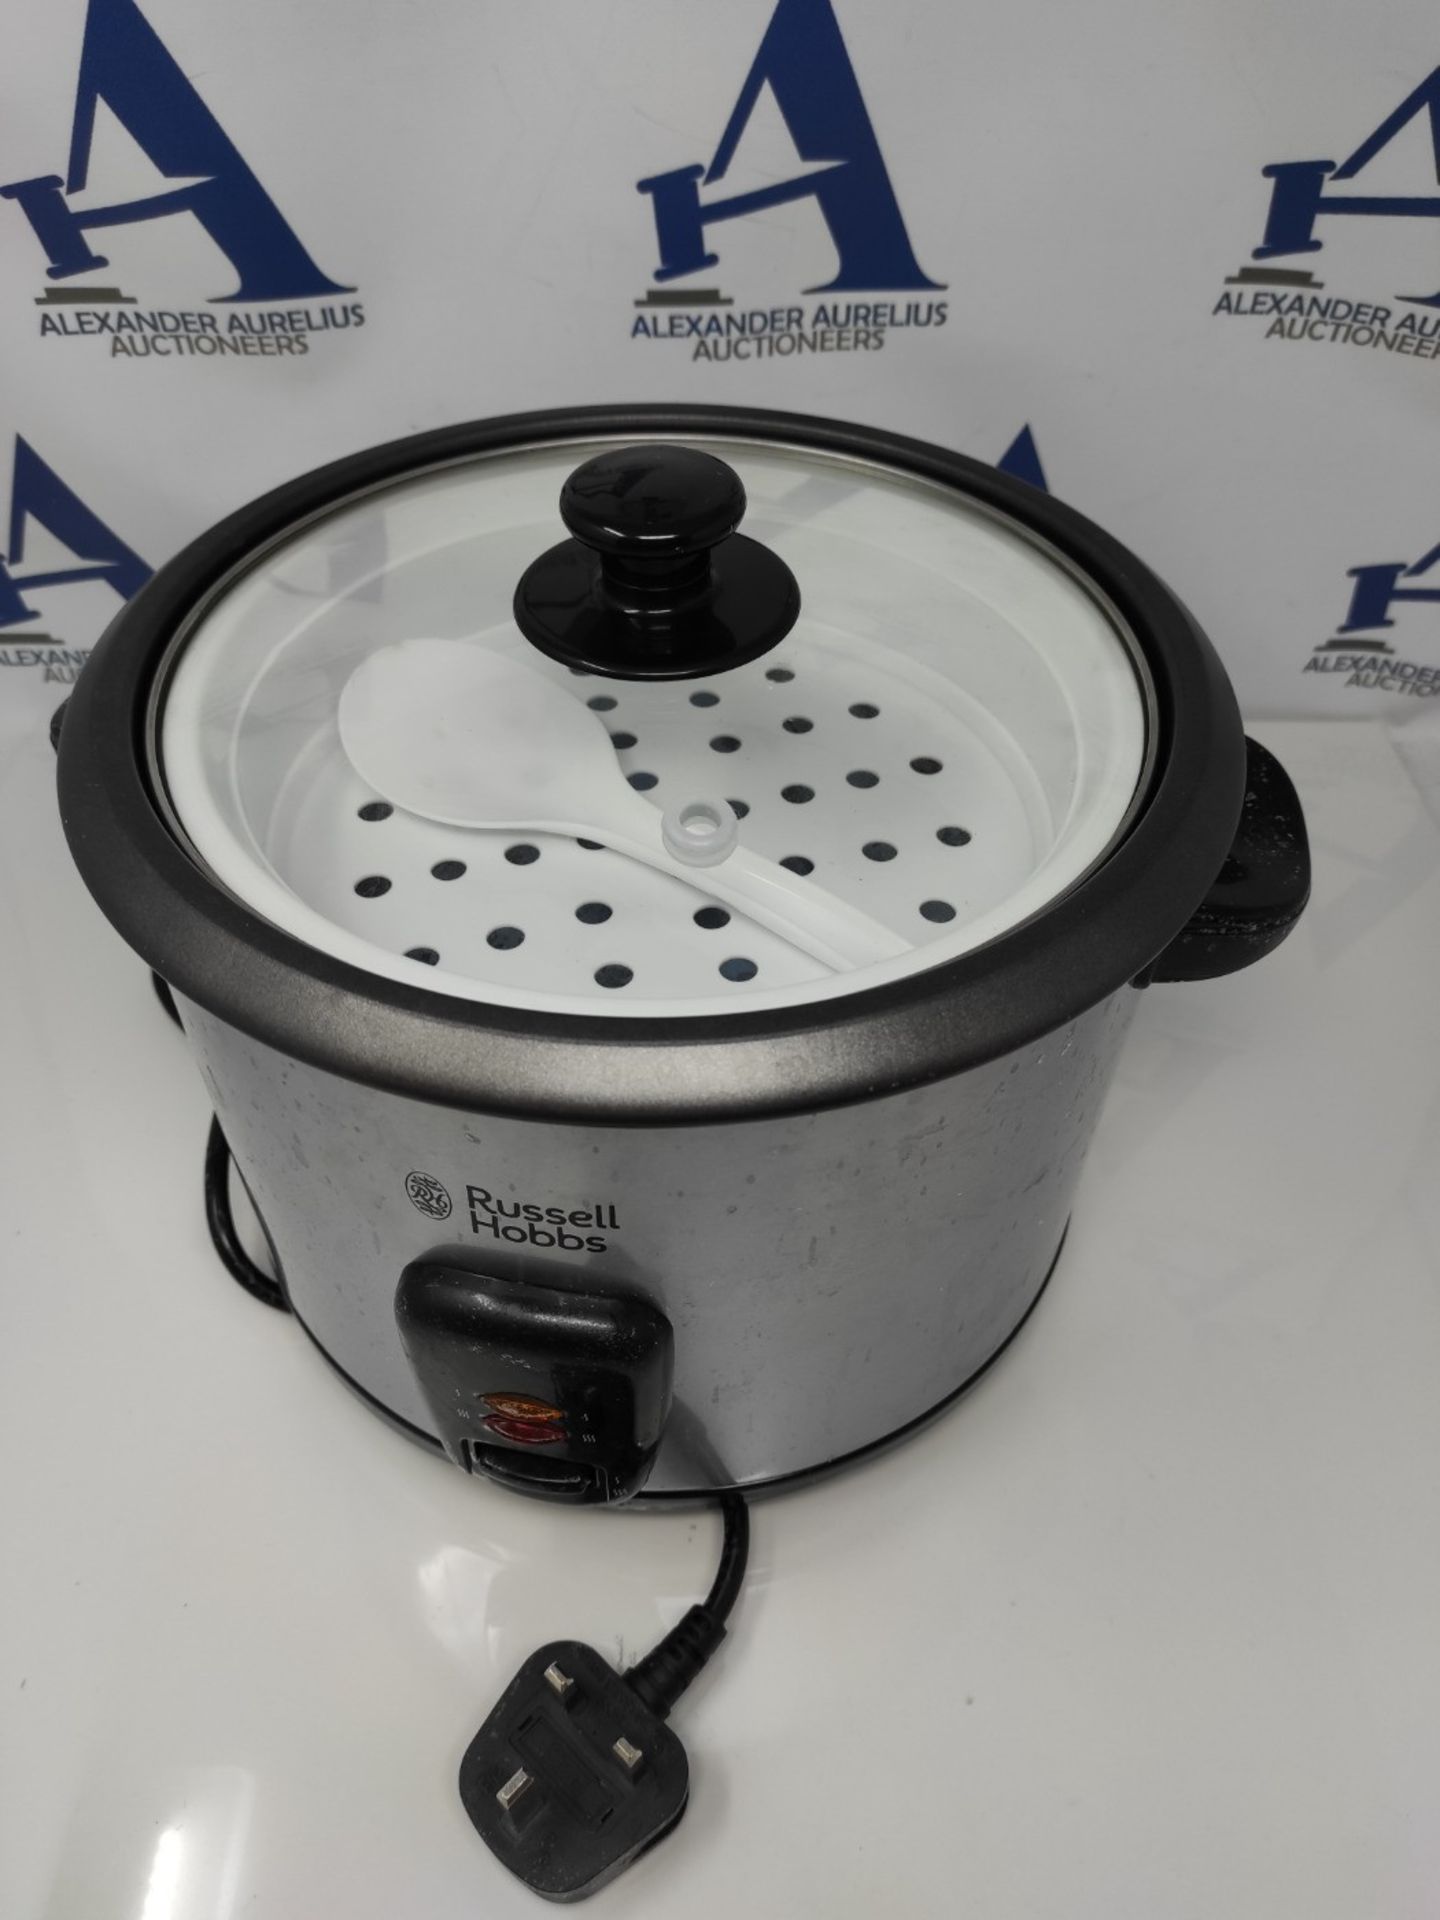 Russell Hobbs Electric Rice Cooker & Steamer - 1.8L (10 cup) Keep warm function, Remov - Bild 3 aus 3